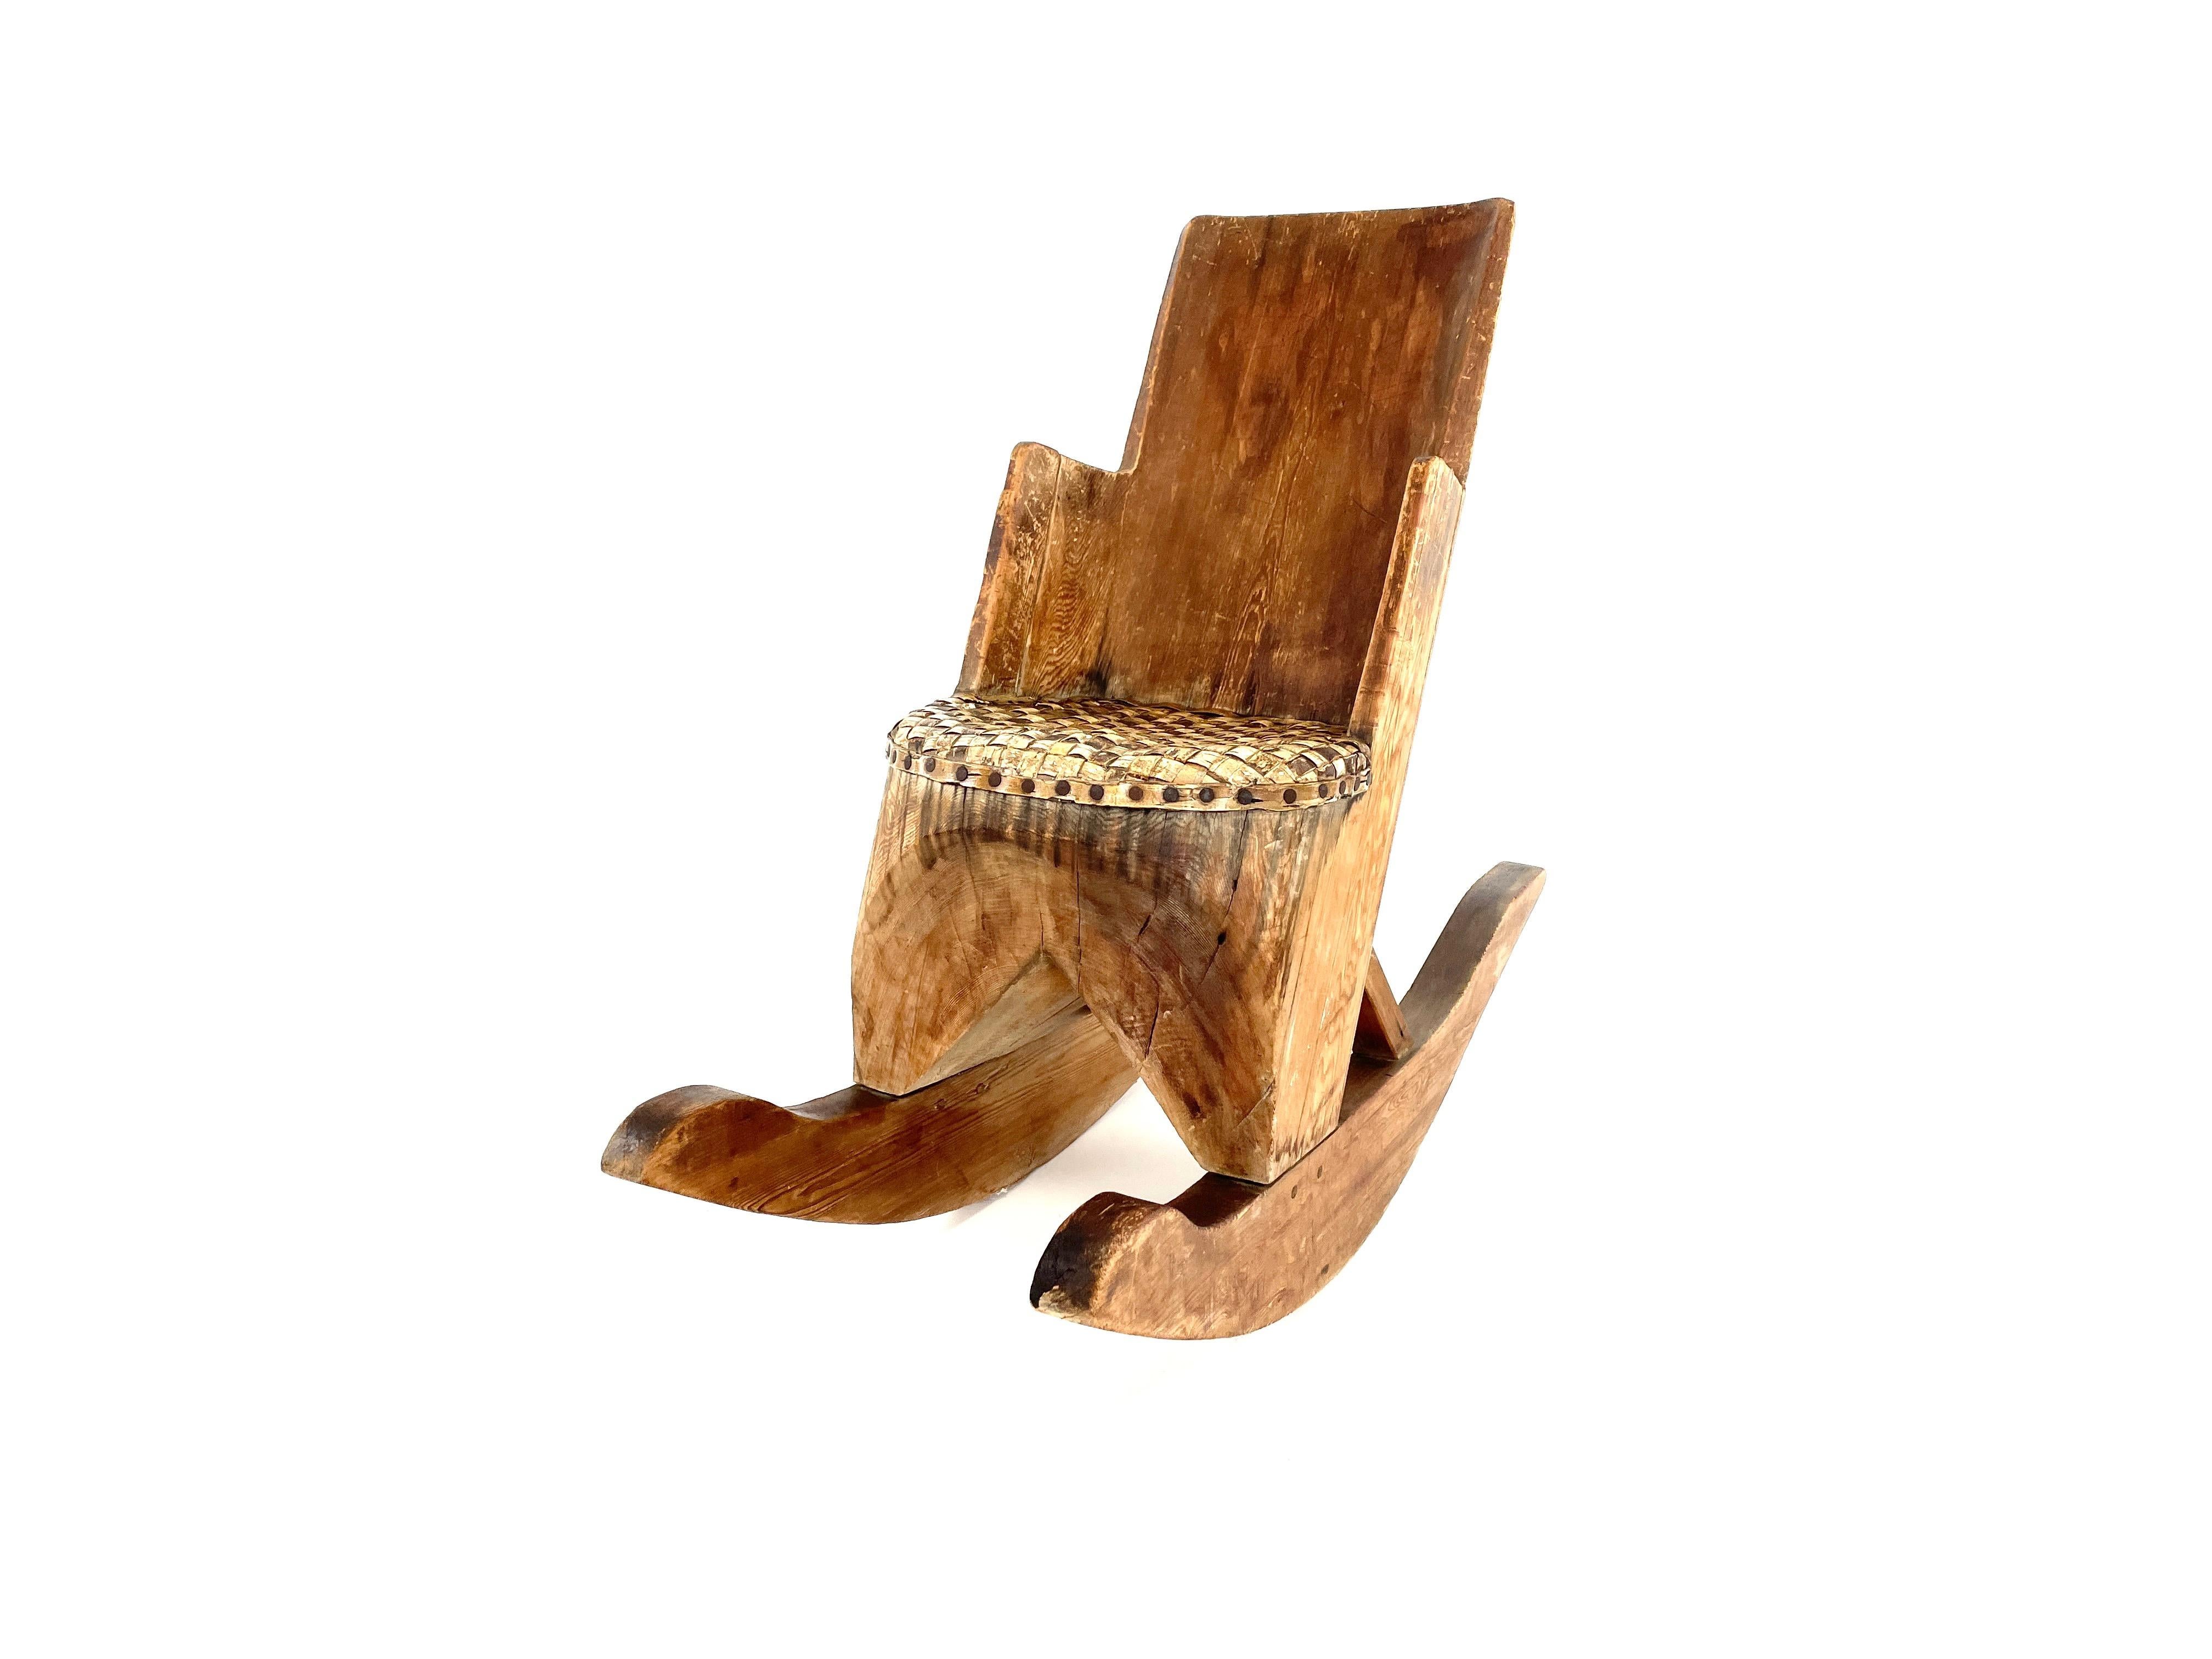 Carved Children's Rocking Chair, Finland, early 1900s For Sale